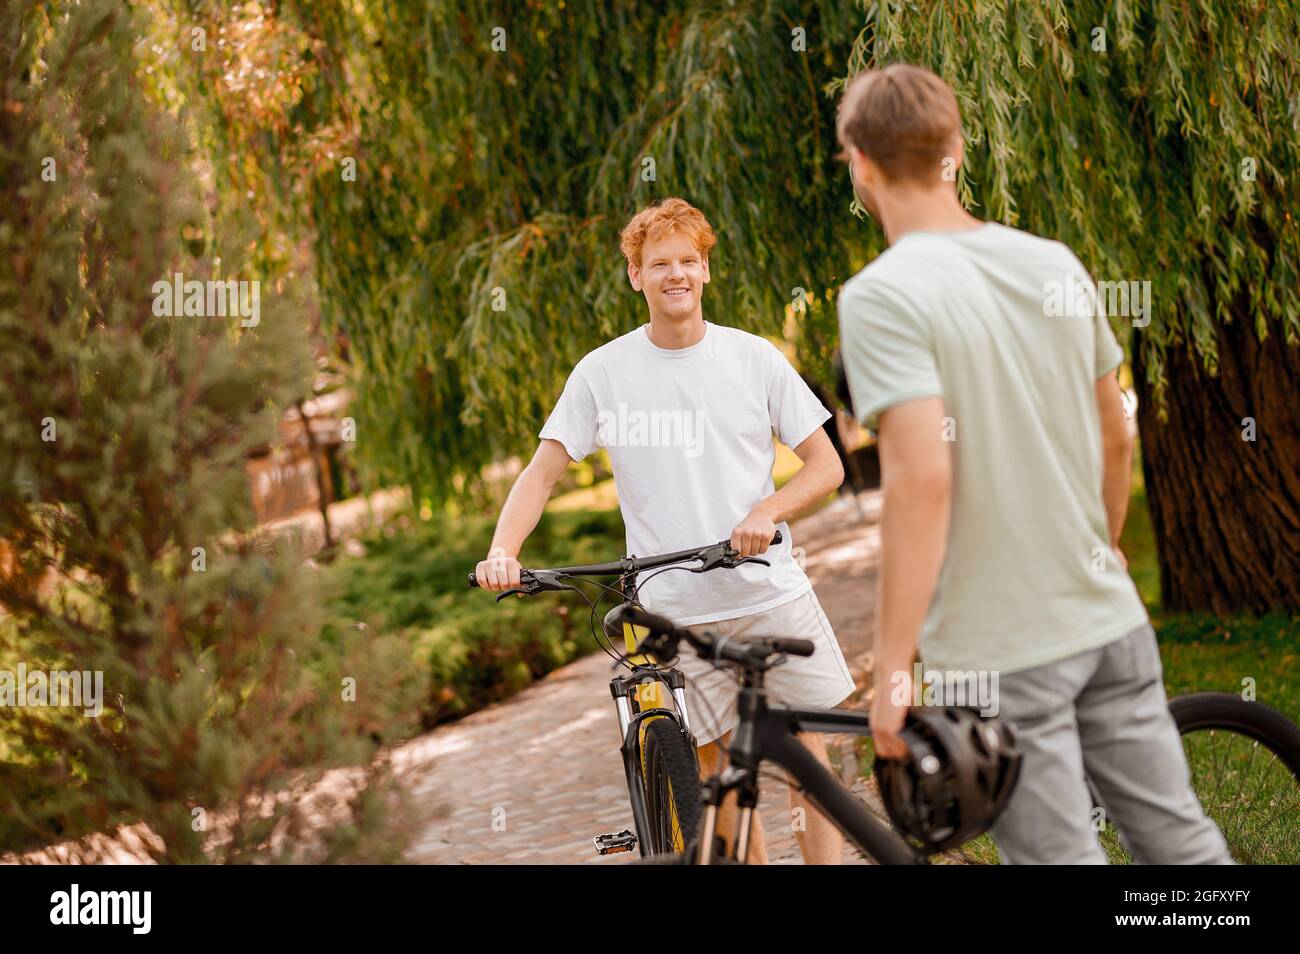 Joyous young bicyclist chatting with his frien Stock Photo